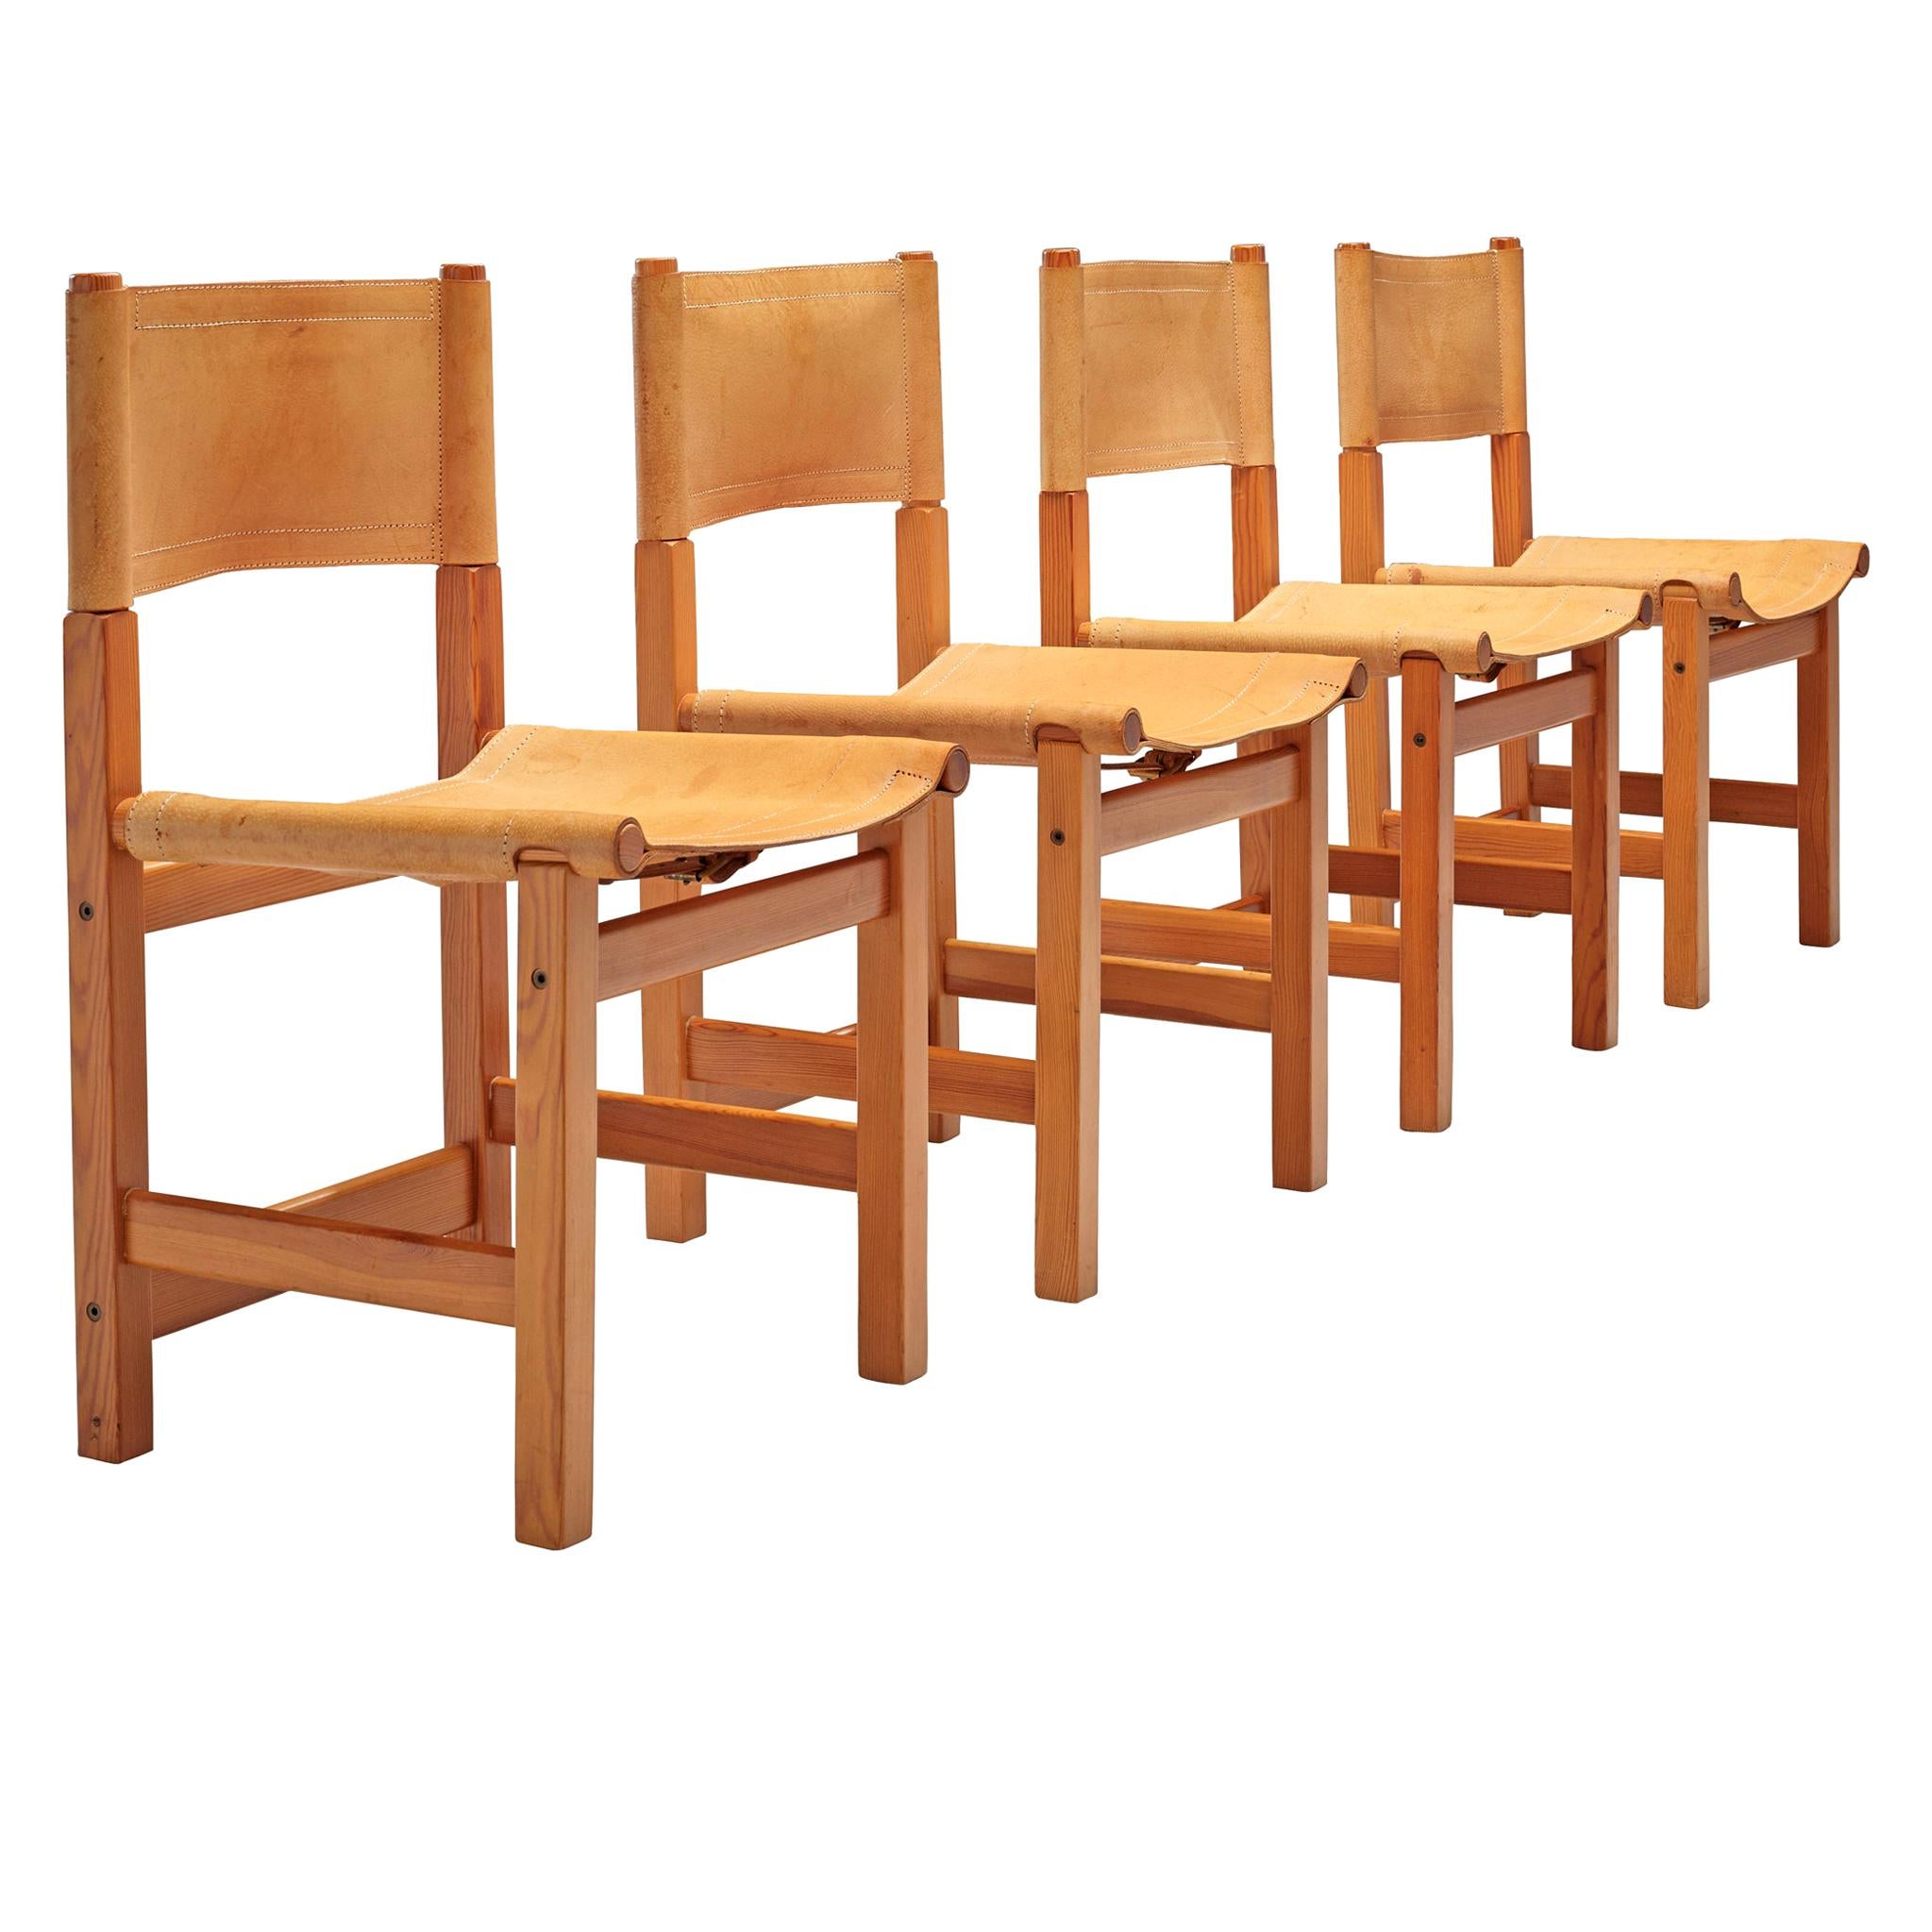 Set of 4 Swedish Dining Chairs in Pine and Leather